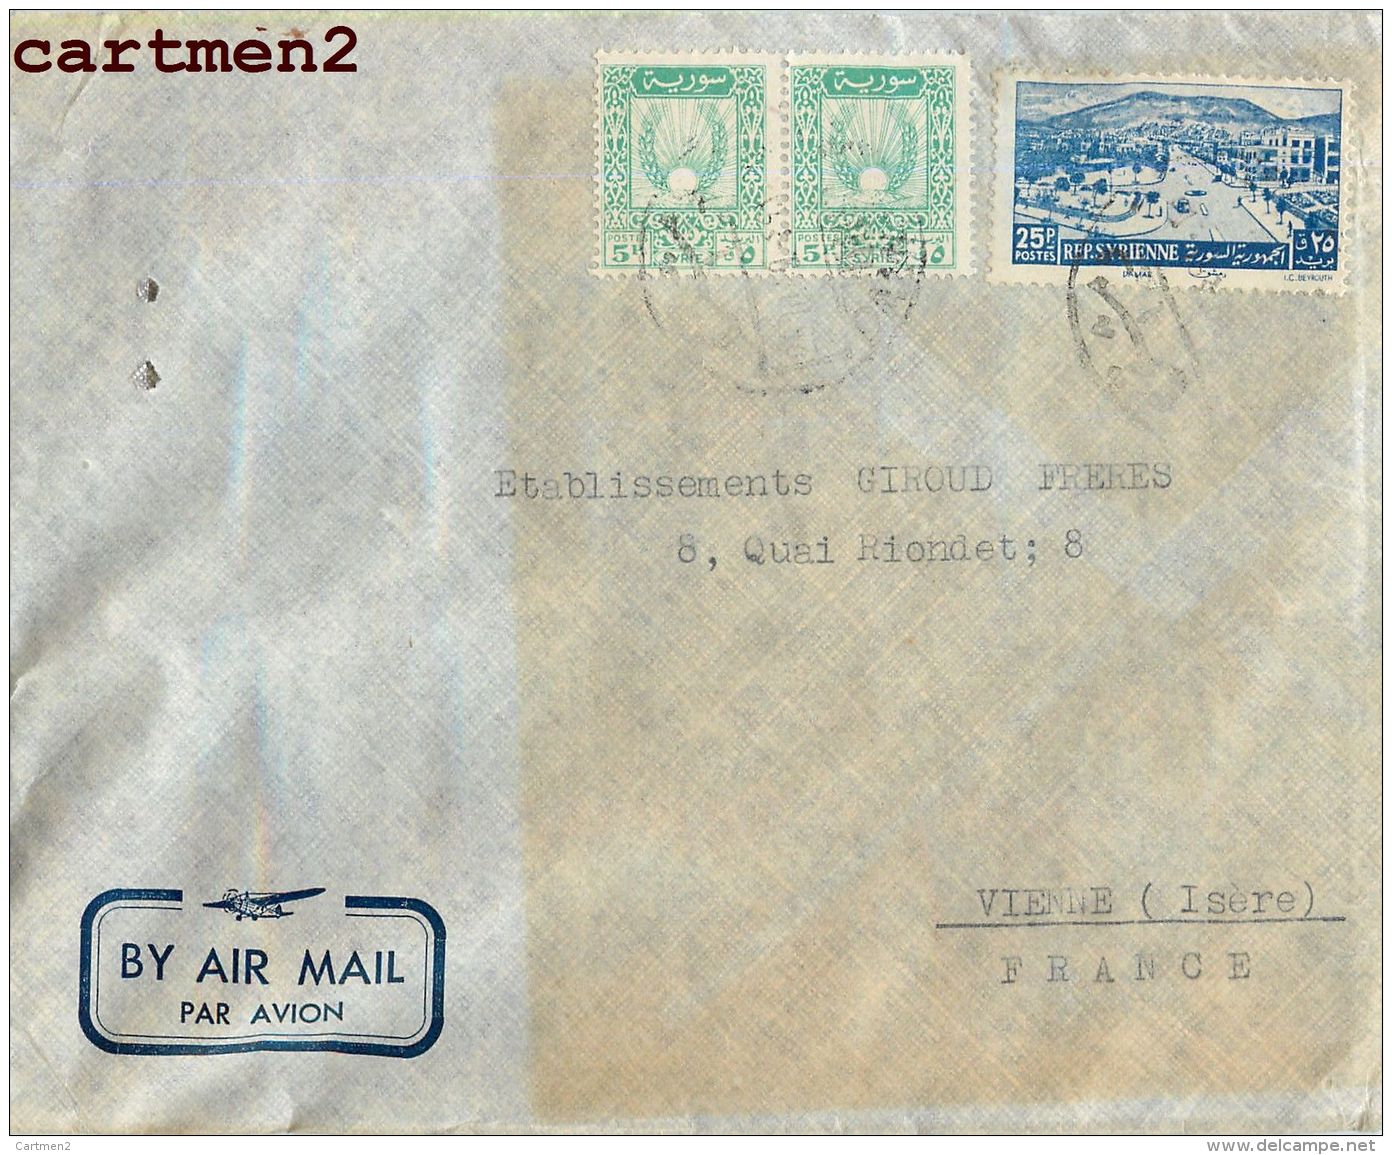 LETTRE LIBAN MICHEL S. MAKHAT BEYROUTH SYRIE BEIRUT LEBANON STAMP TIMBRE LIBANAISE SYRIA DAMAS - Libano